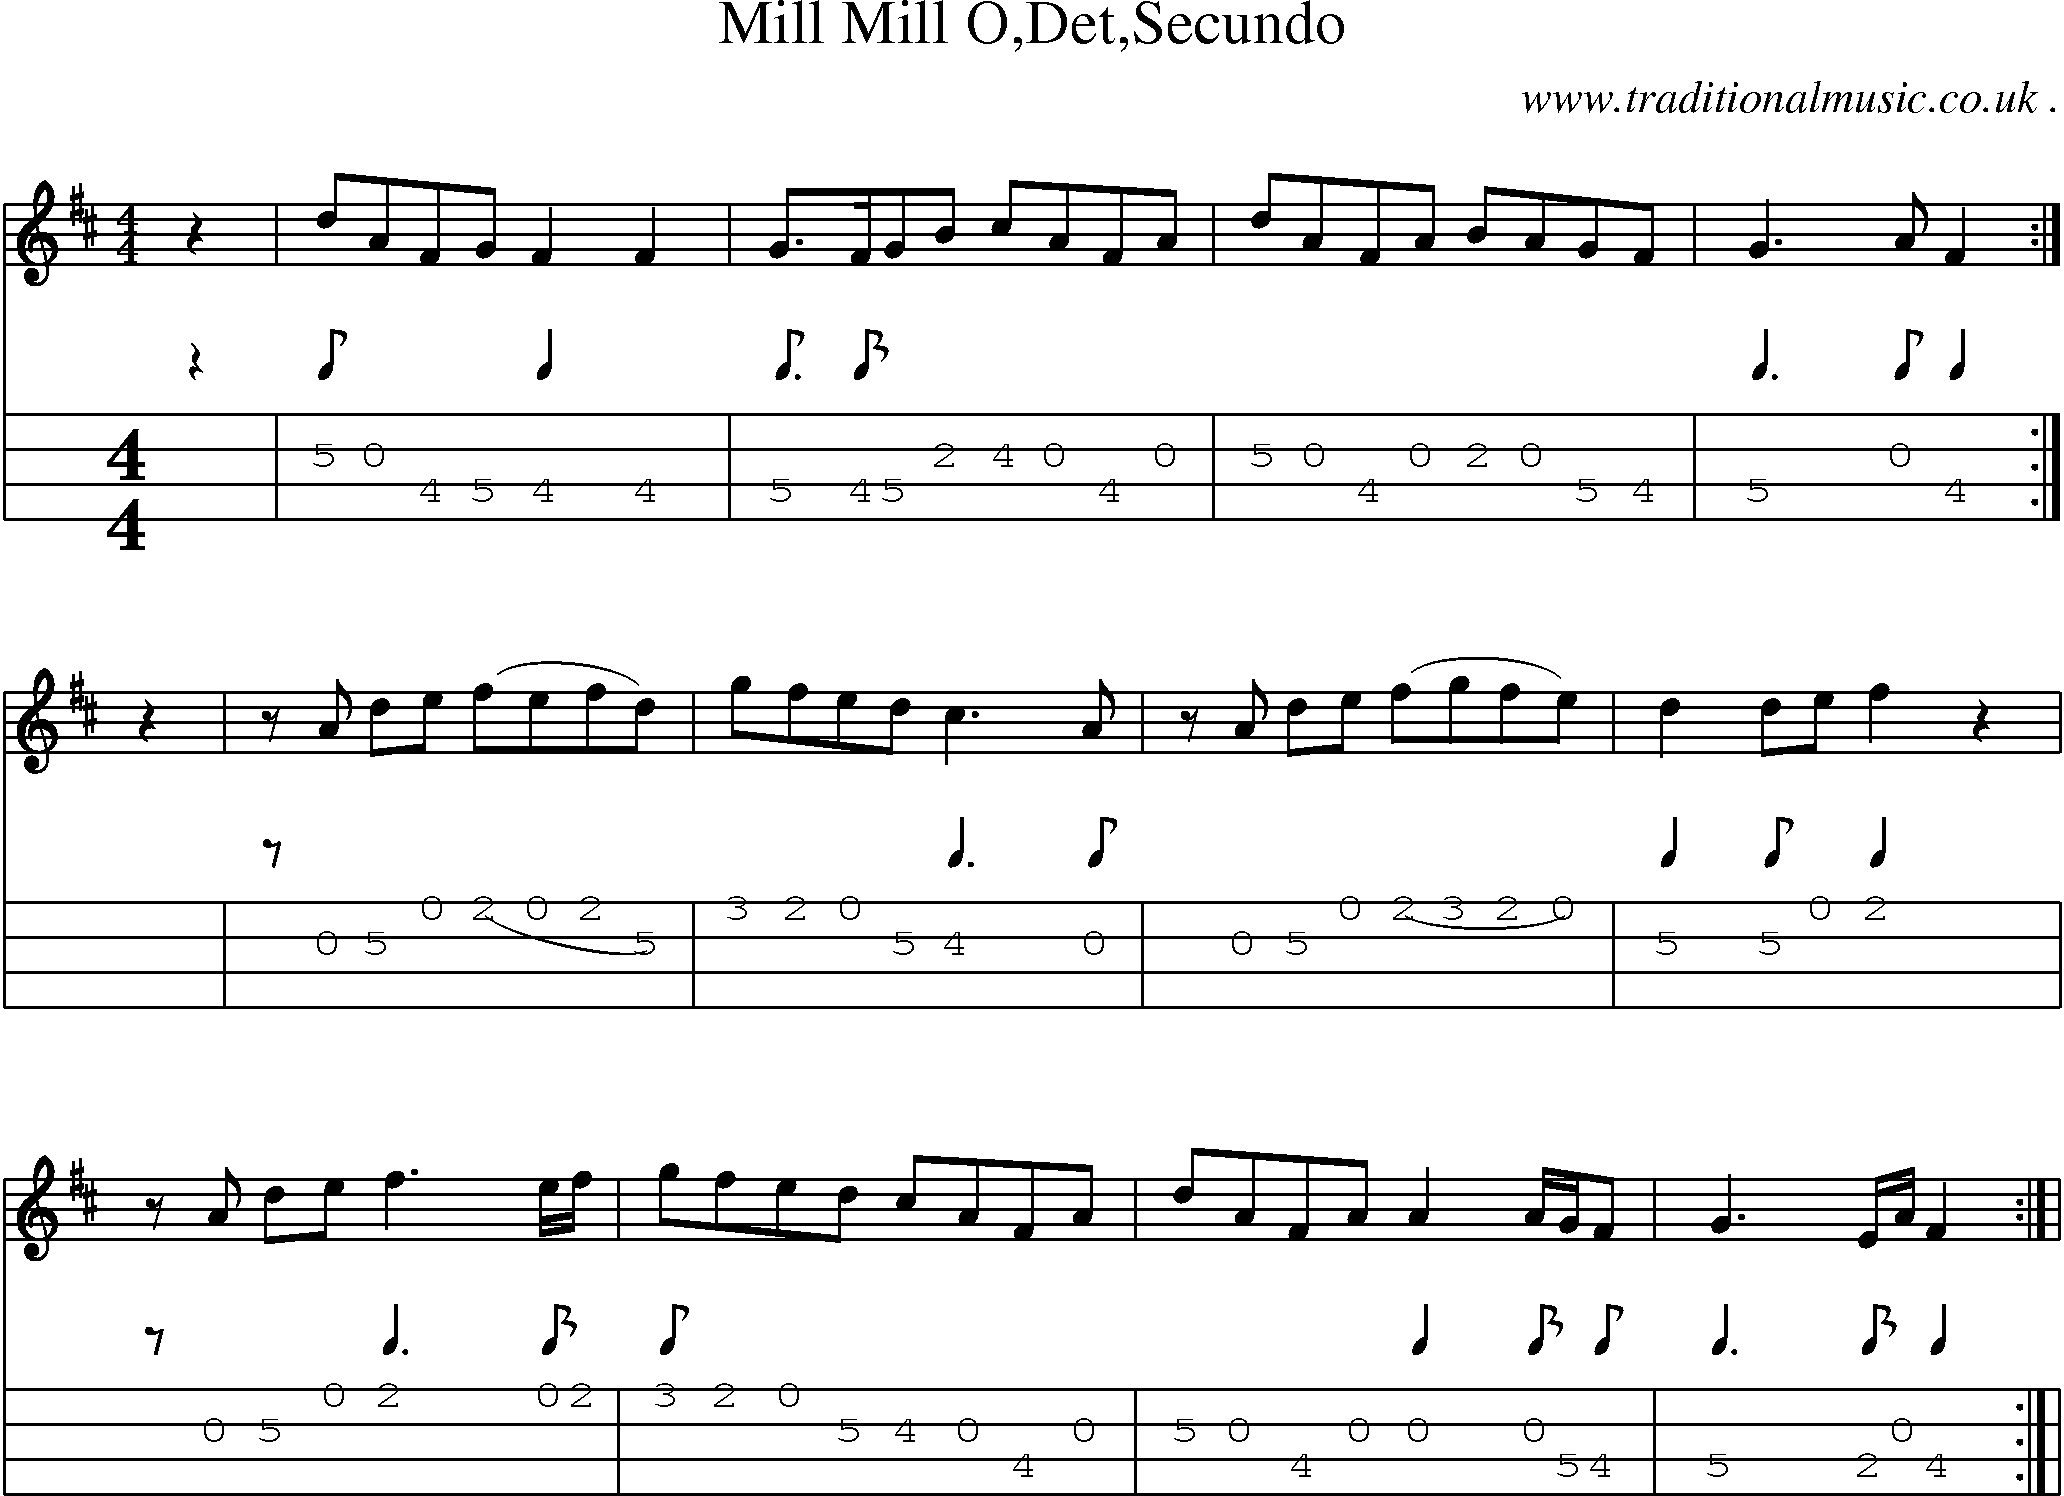 Sheet-Music and Mandolin Tabs for Mill Mill Odetsecundo